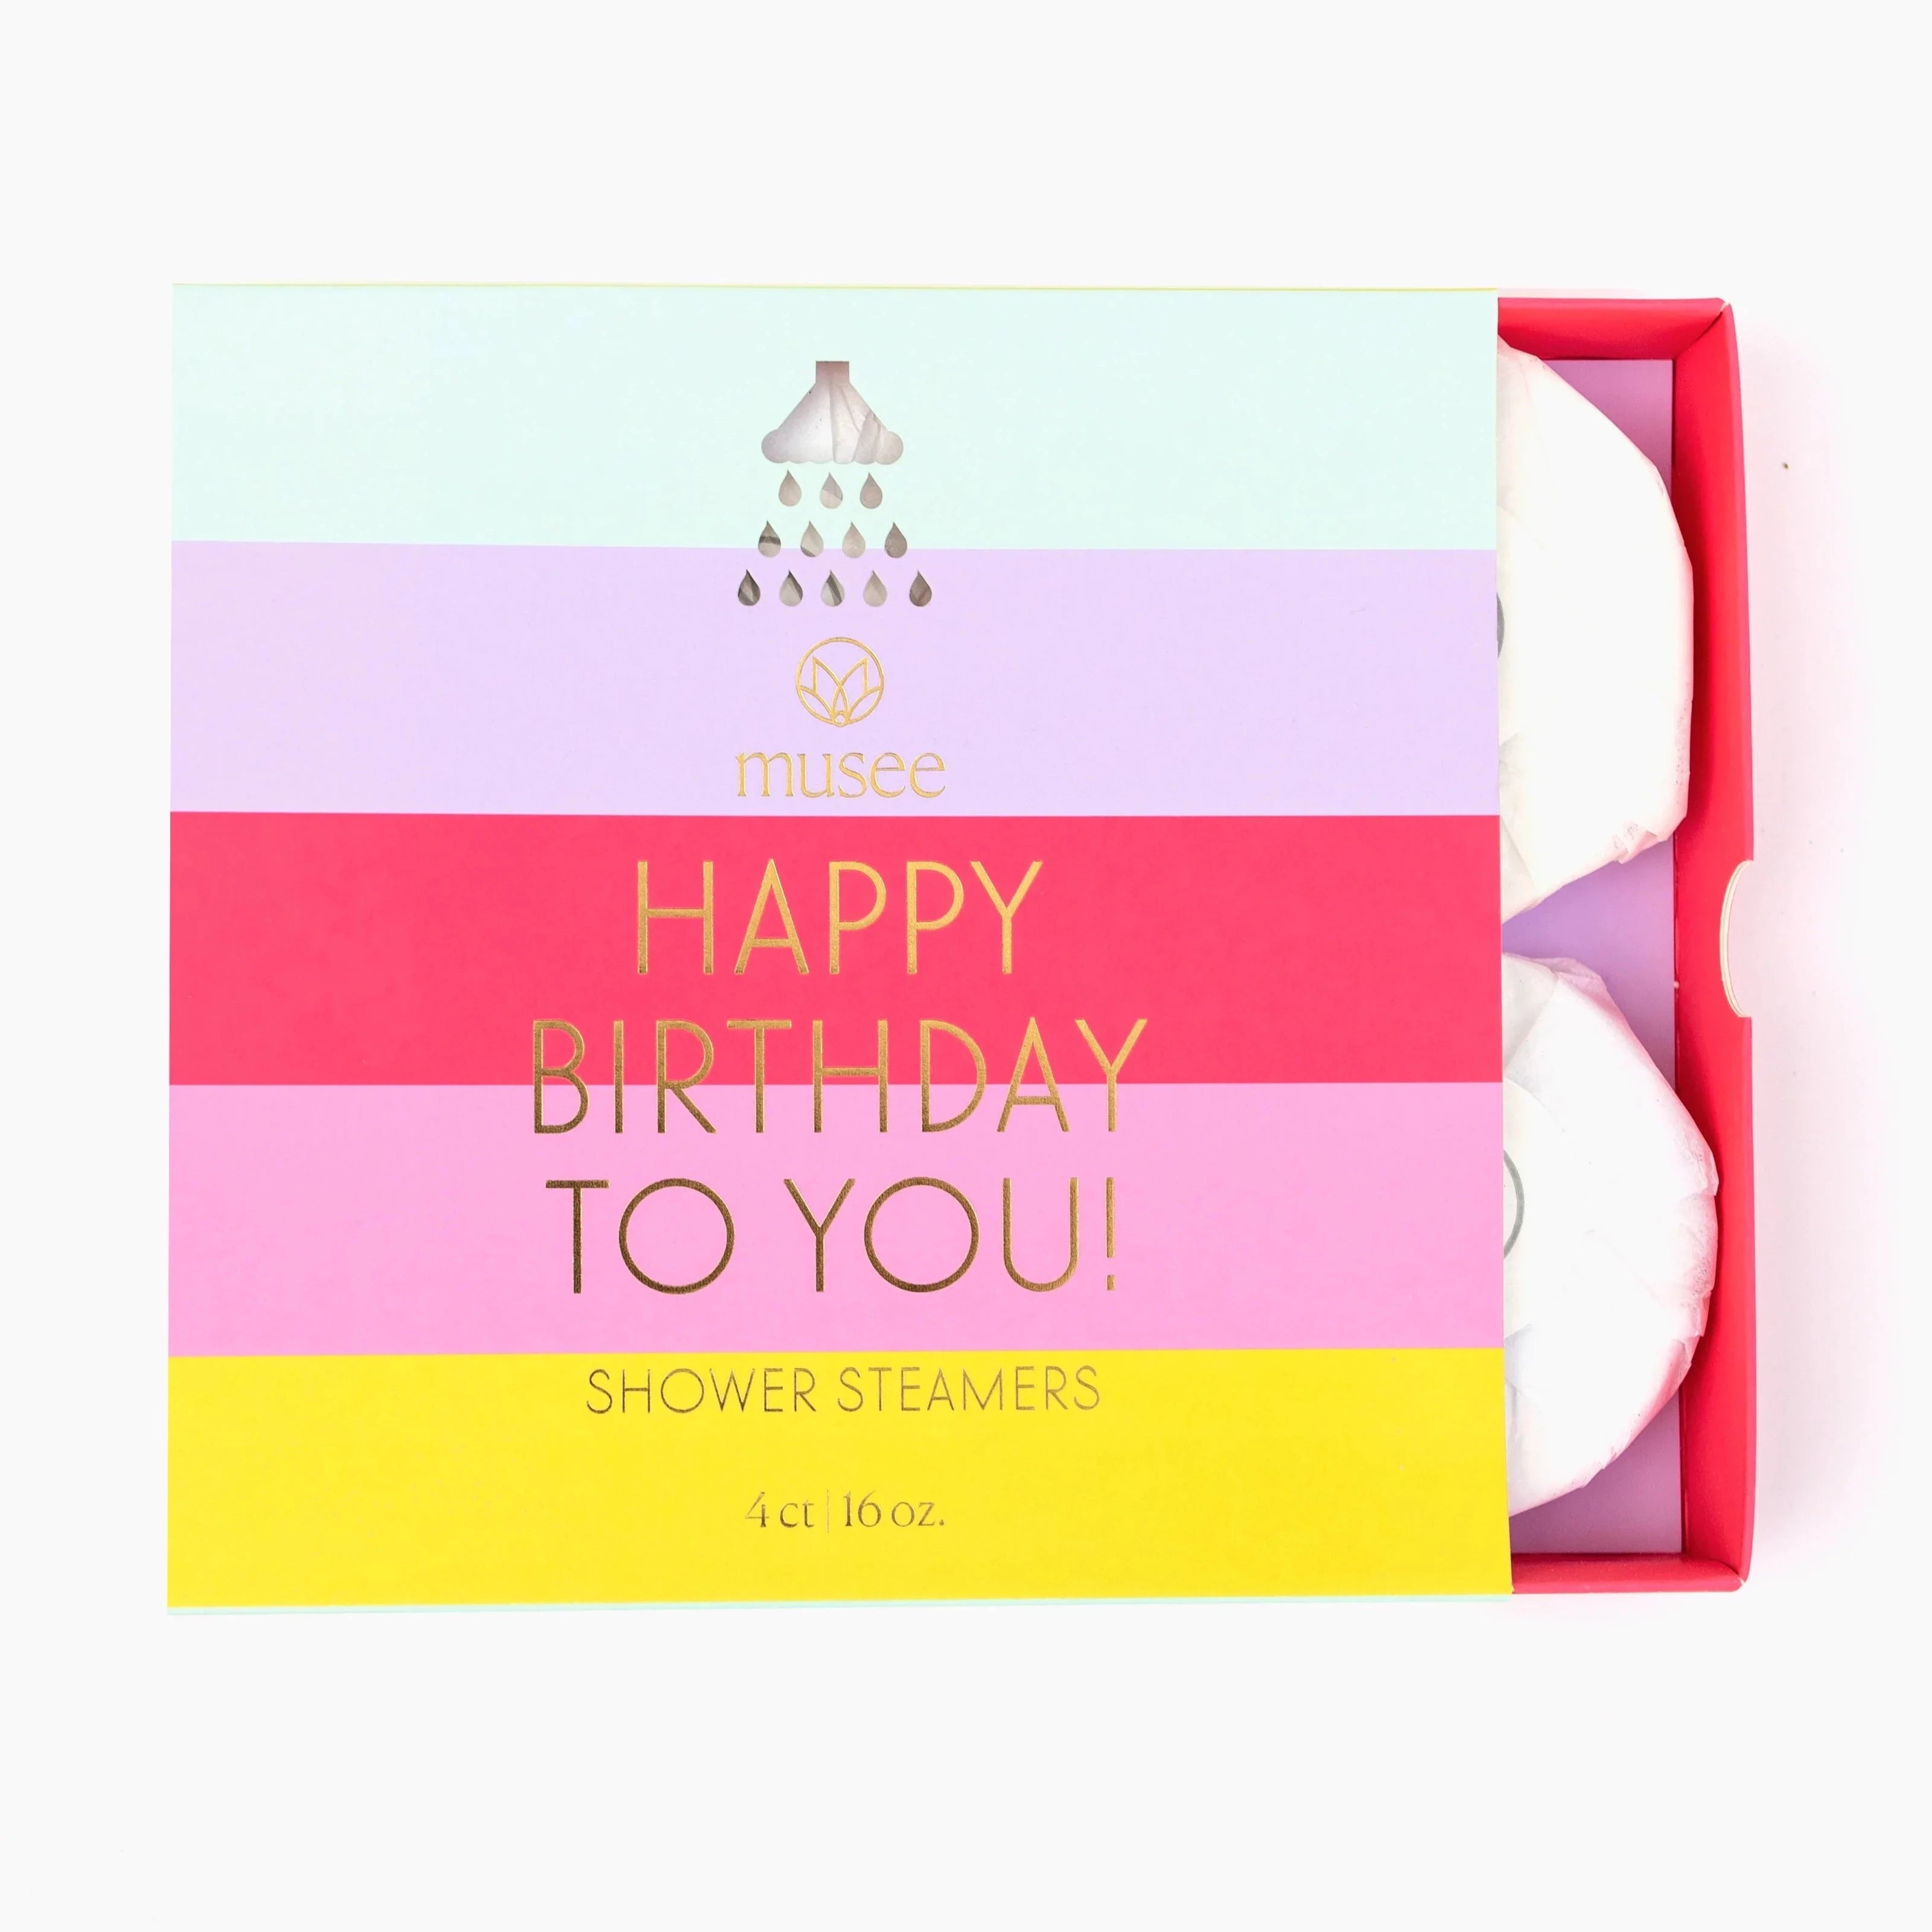 Shower steamer packaging with stripes across the from in Blue, purple, red, pink, and yellow. Gold text that reads &quot;Happy Birthday to You Shower Steamers- 4ct&quot; Box is slightly opened to show shower steamers inside that are wrapped in white paper